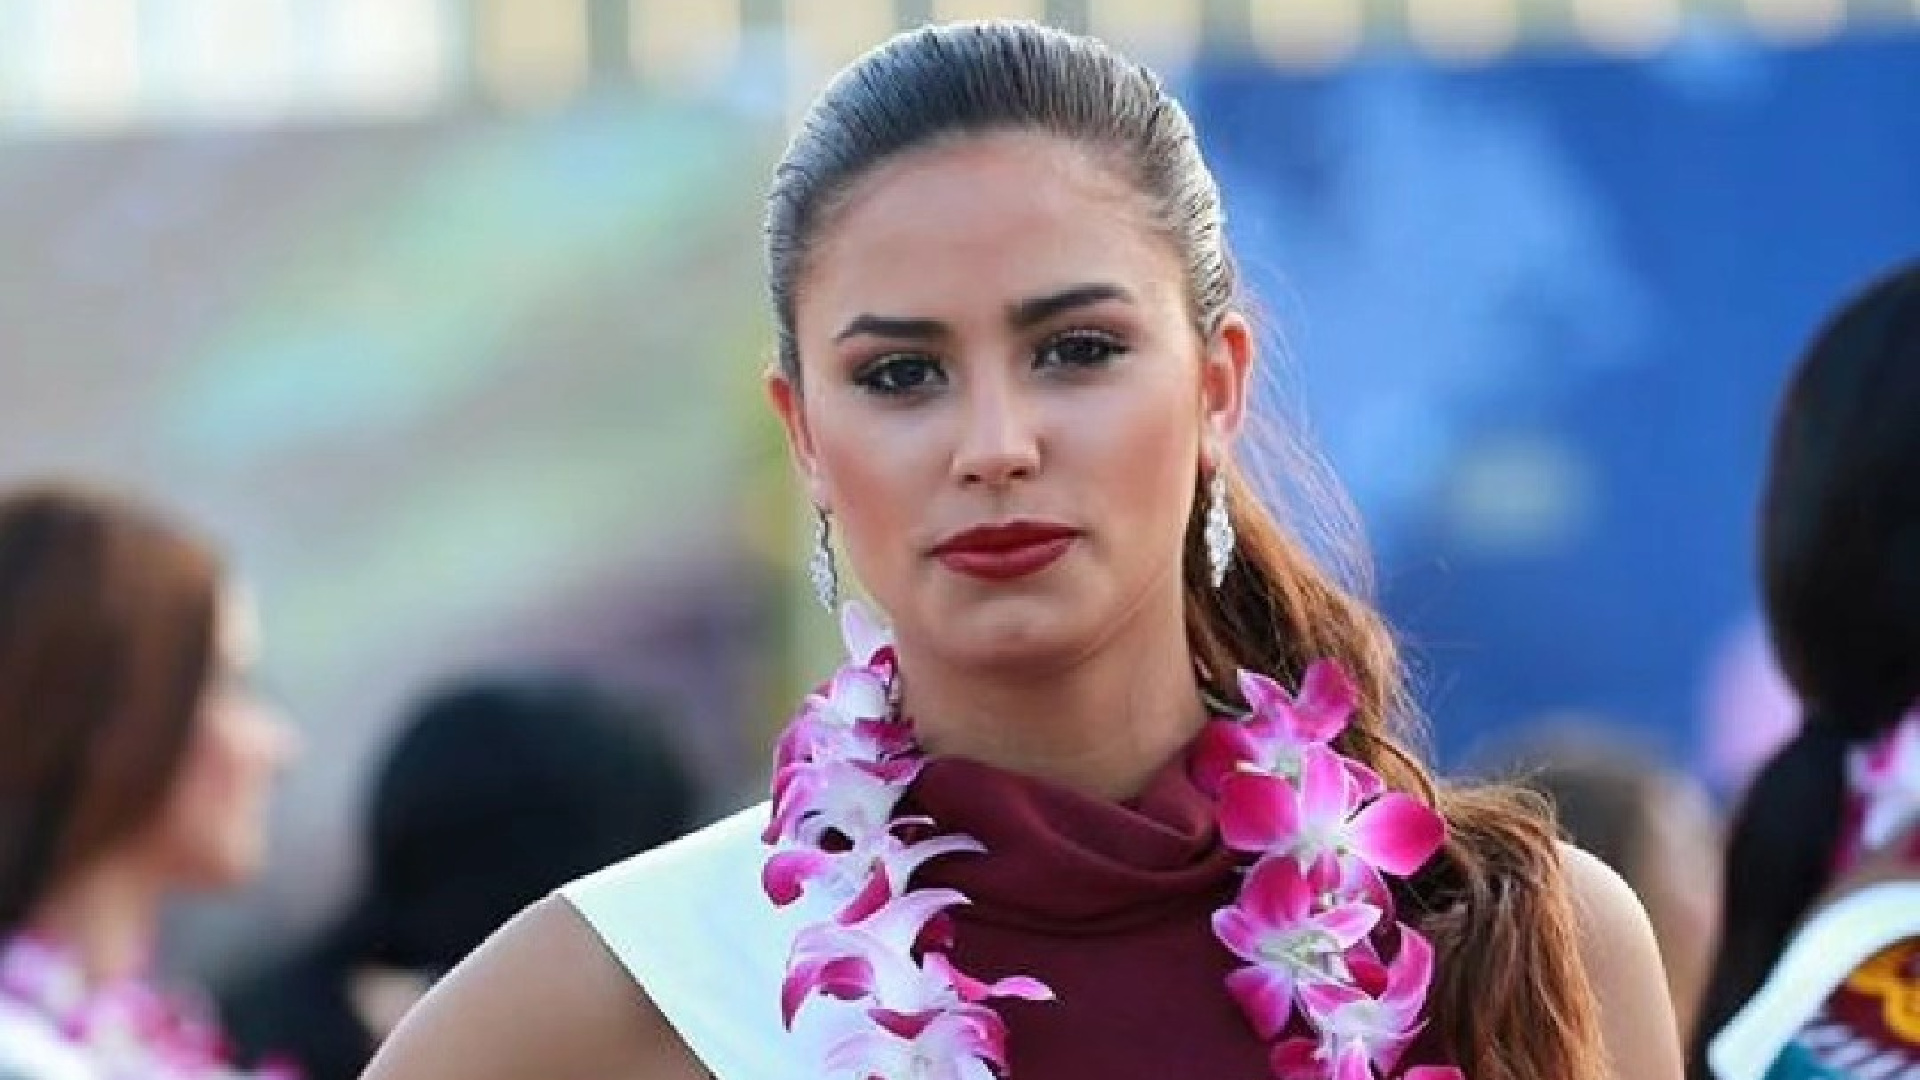 The tragic death of Sherika de Armas, former Miss World candidate, at age 26